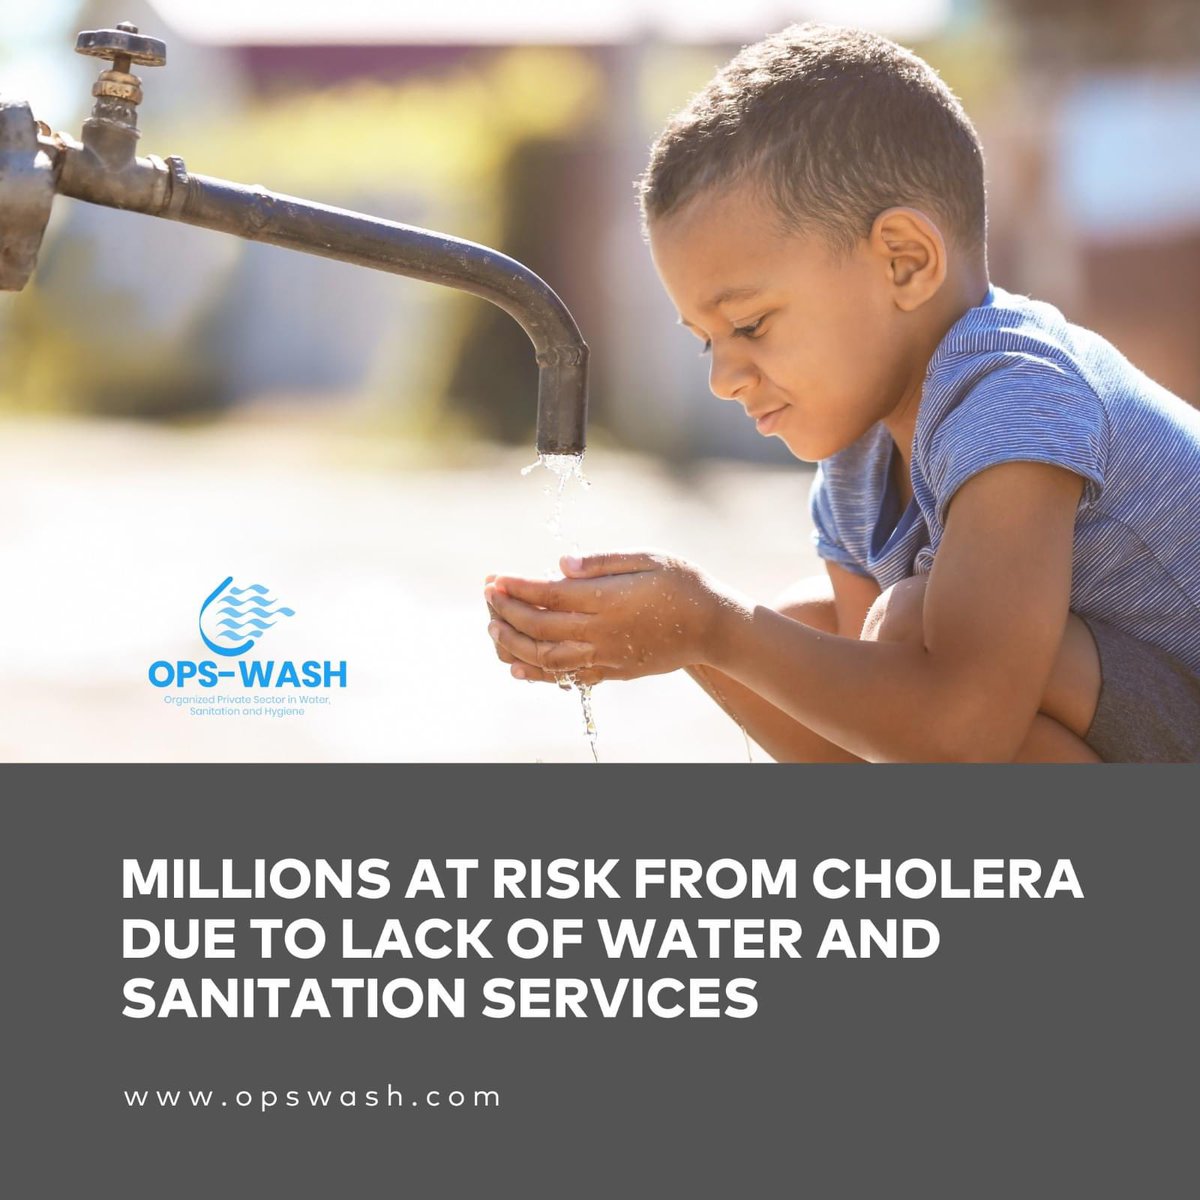 The rise in cholera is being driven by persistent gaps in access to safe water and sanitation. Although efforts are being made to close these gaps in places. #sdg6 #goal6 #cholera 💧